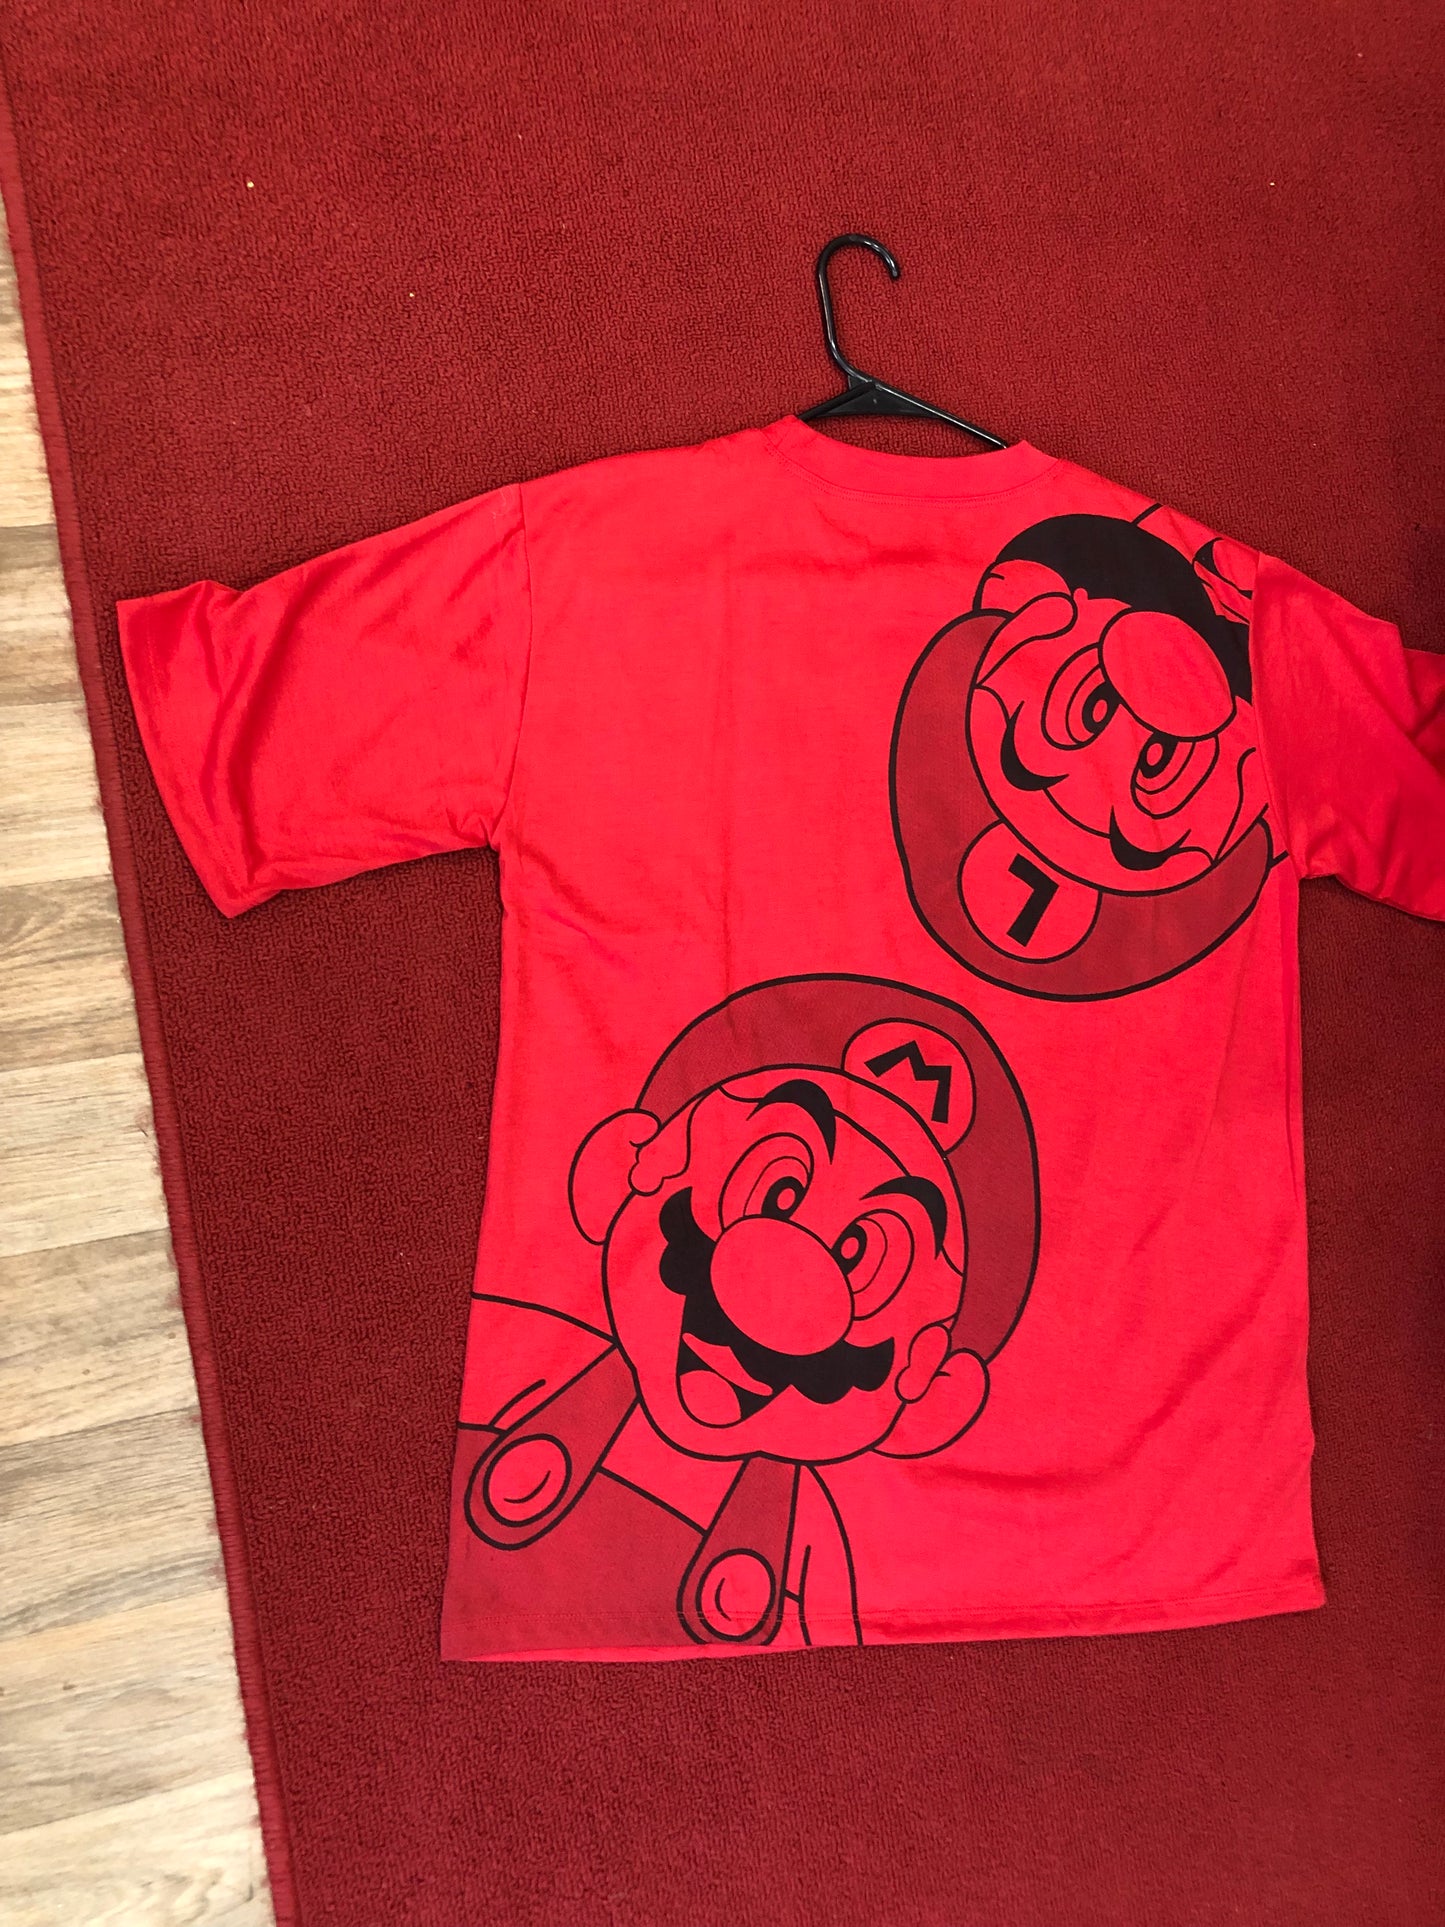 Men/Woman Graphic Nintendo Super Mario T-Shirt Color Red Size L/XL "New Arrival" SOLD OUT